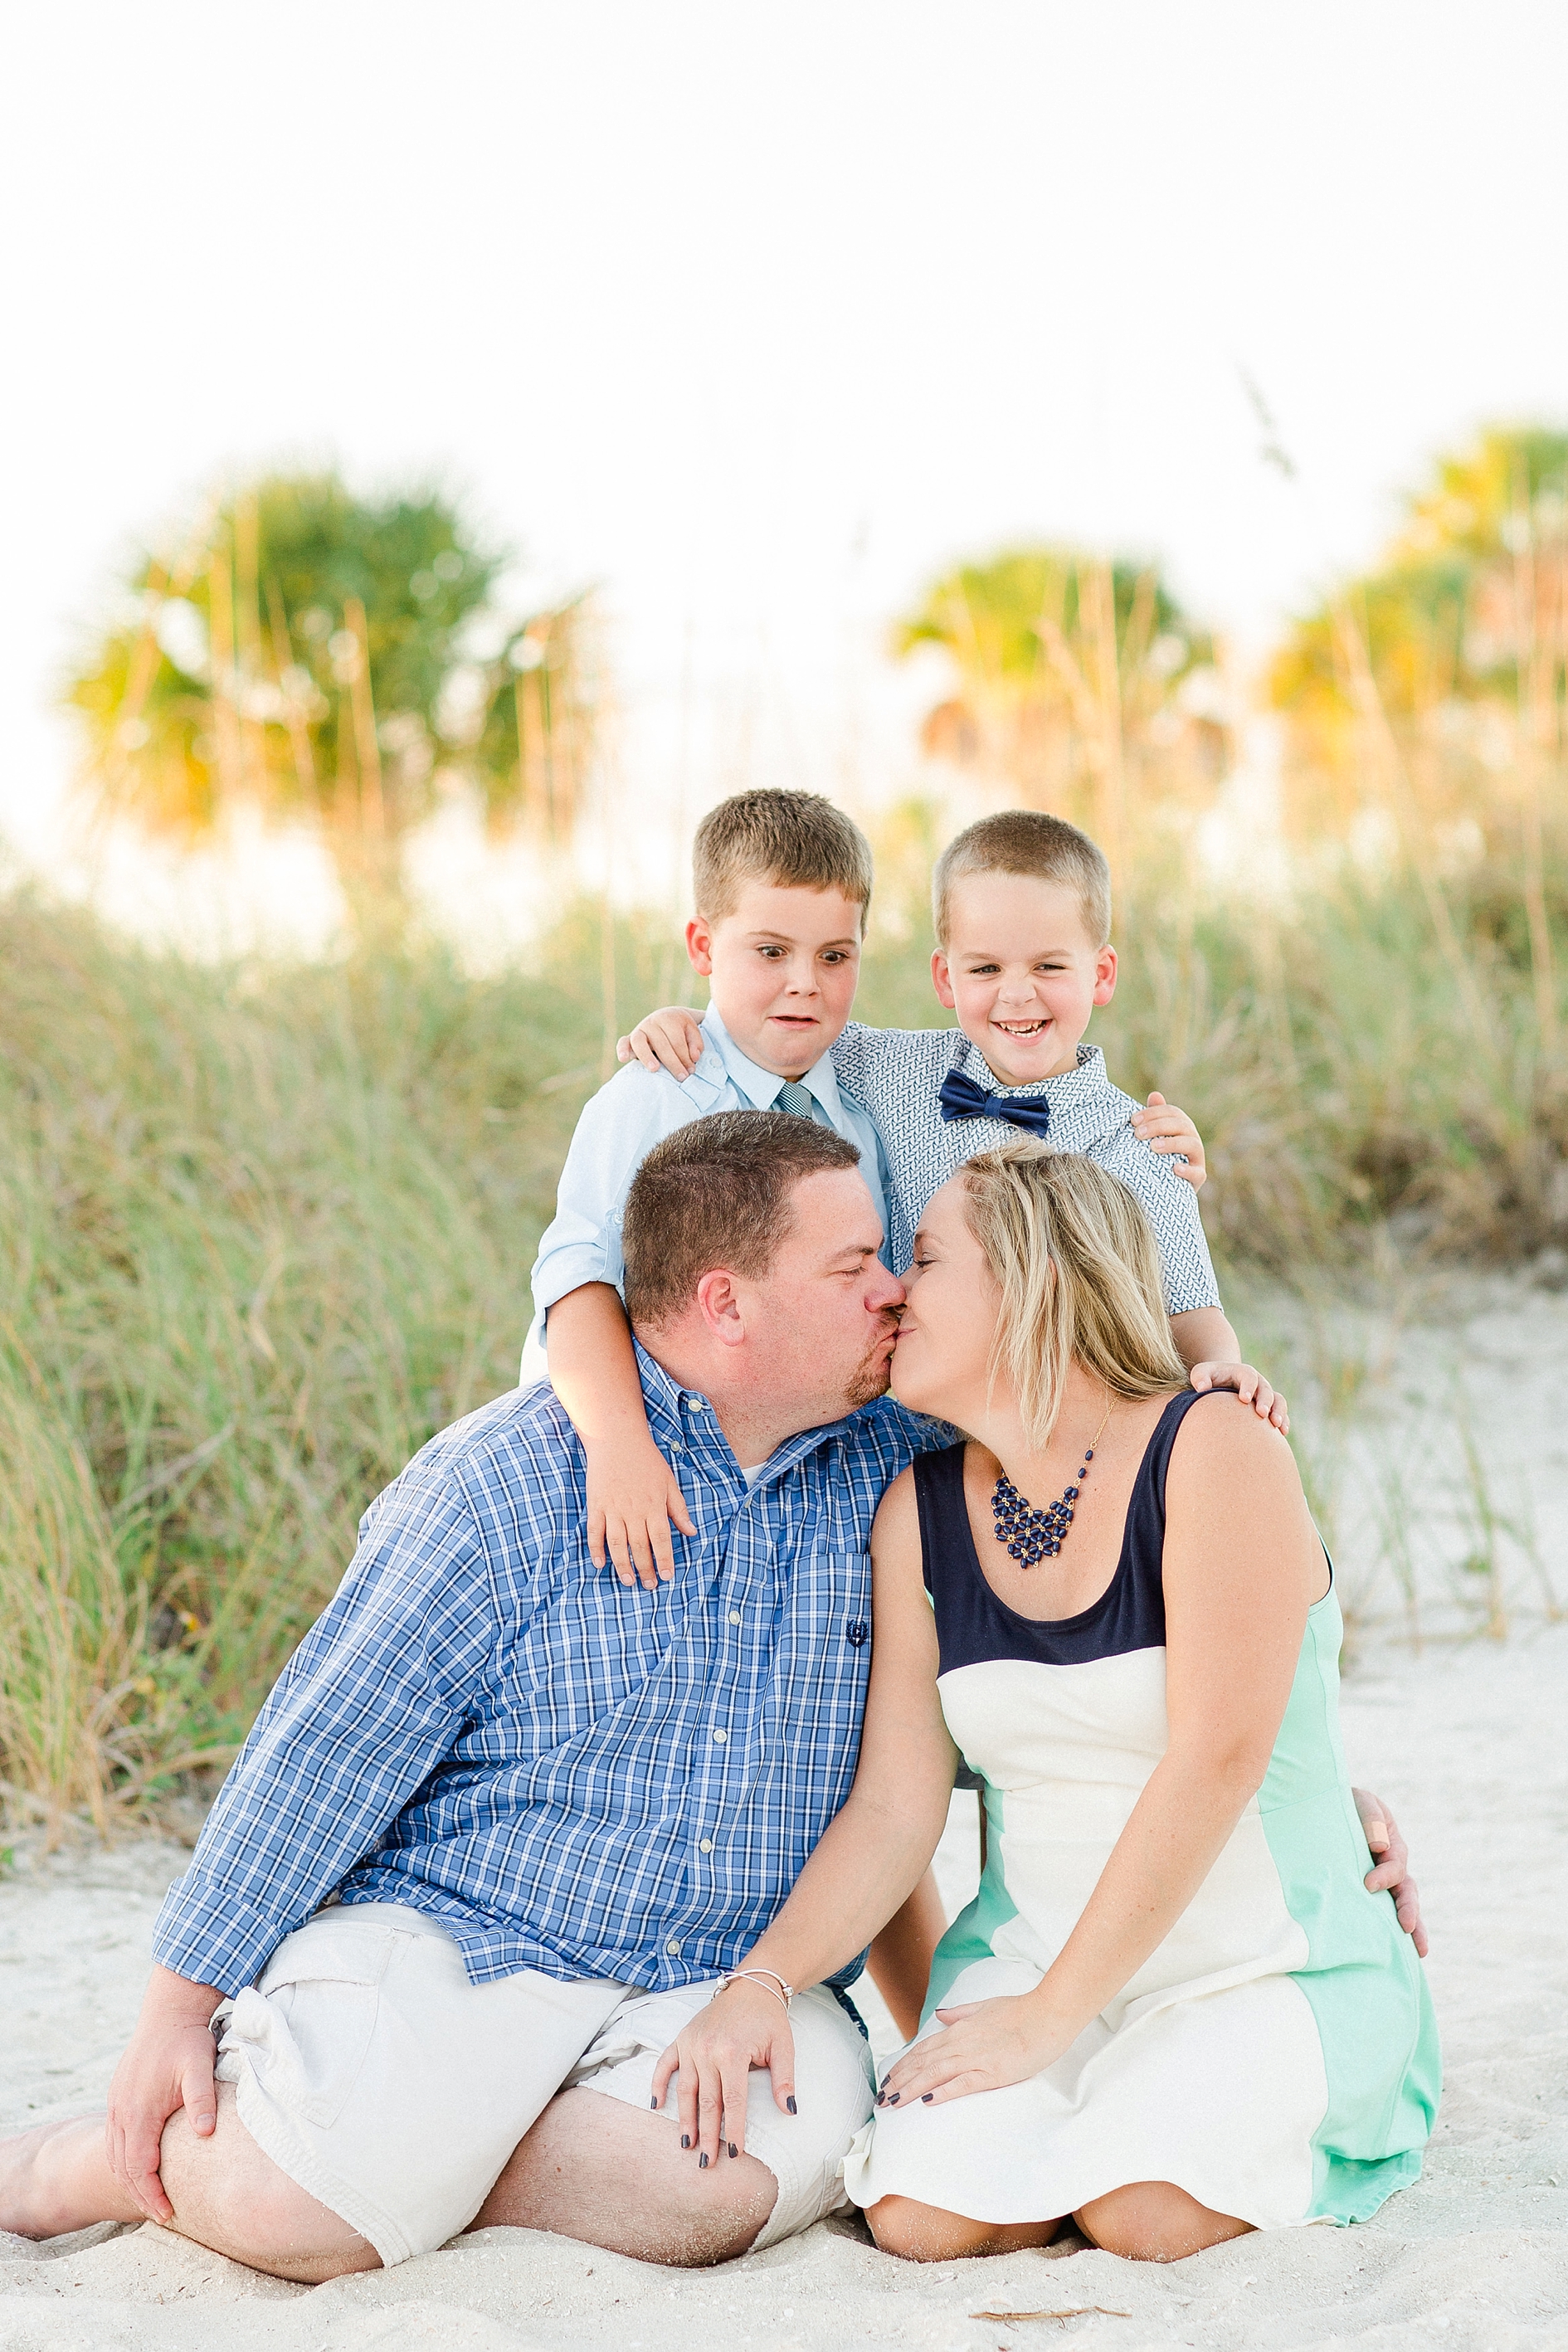 Tarpon Springs Family Session | © Ailyn La Torre Photography 2015